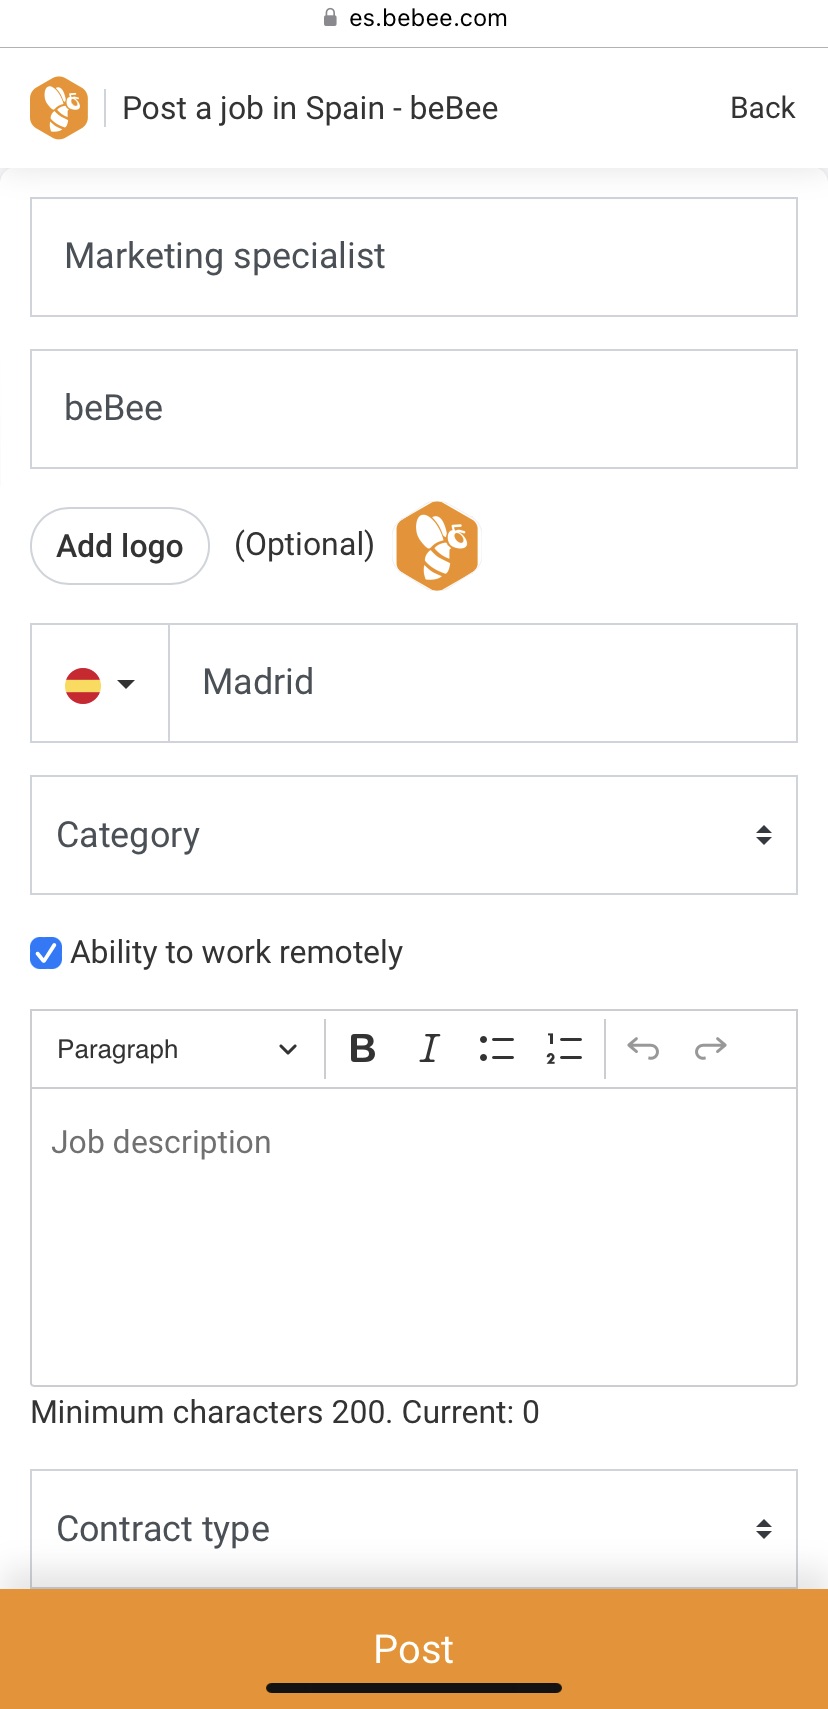 @ es.bebee.com

S Post a job in Spain - beBee Back

Marketing specialist

beBee

Add logo = (Optional) oO

S ~ Madrid

Category $

Ability to work remotely
Paragraph v B I Z ;Z ©

Job description

Minimum characters 200. Current: 0

“»

Contract type

oI